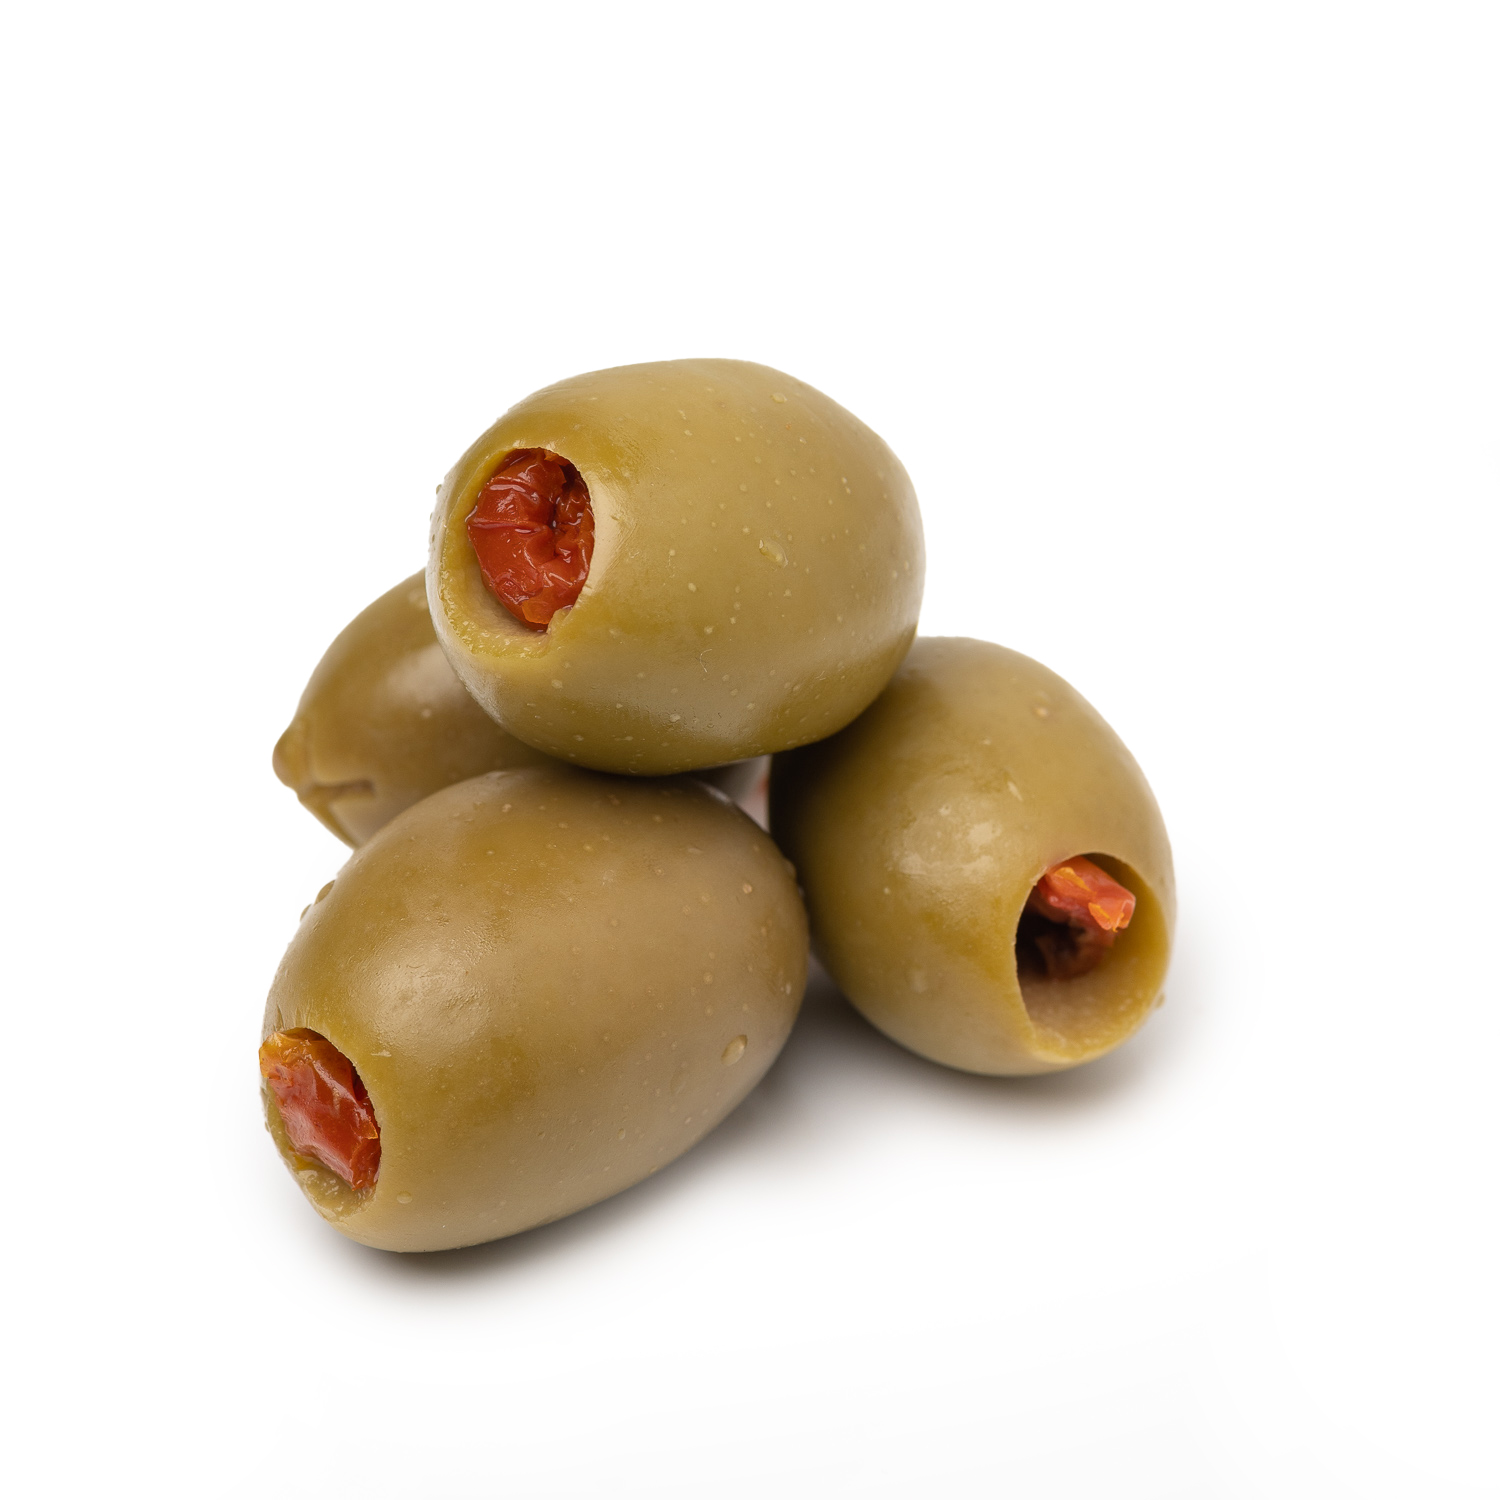 Green Olives with Sun dried Tomato